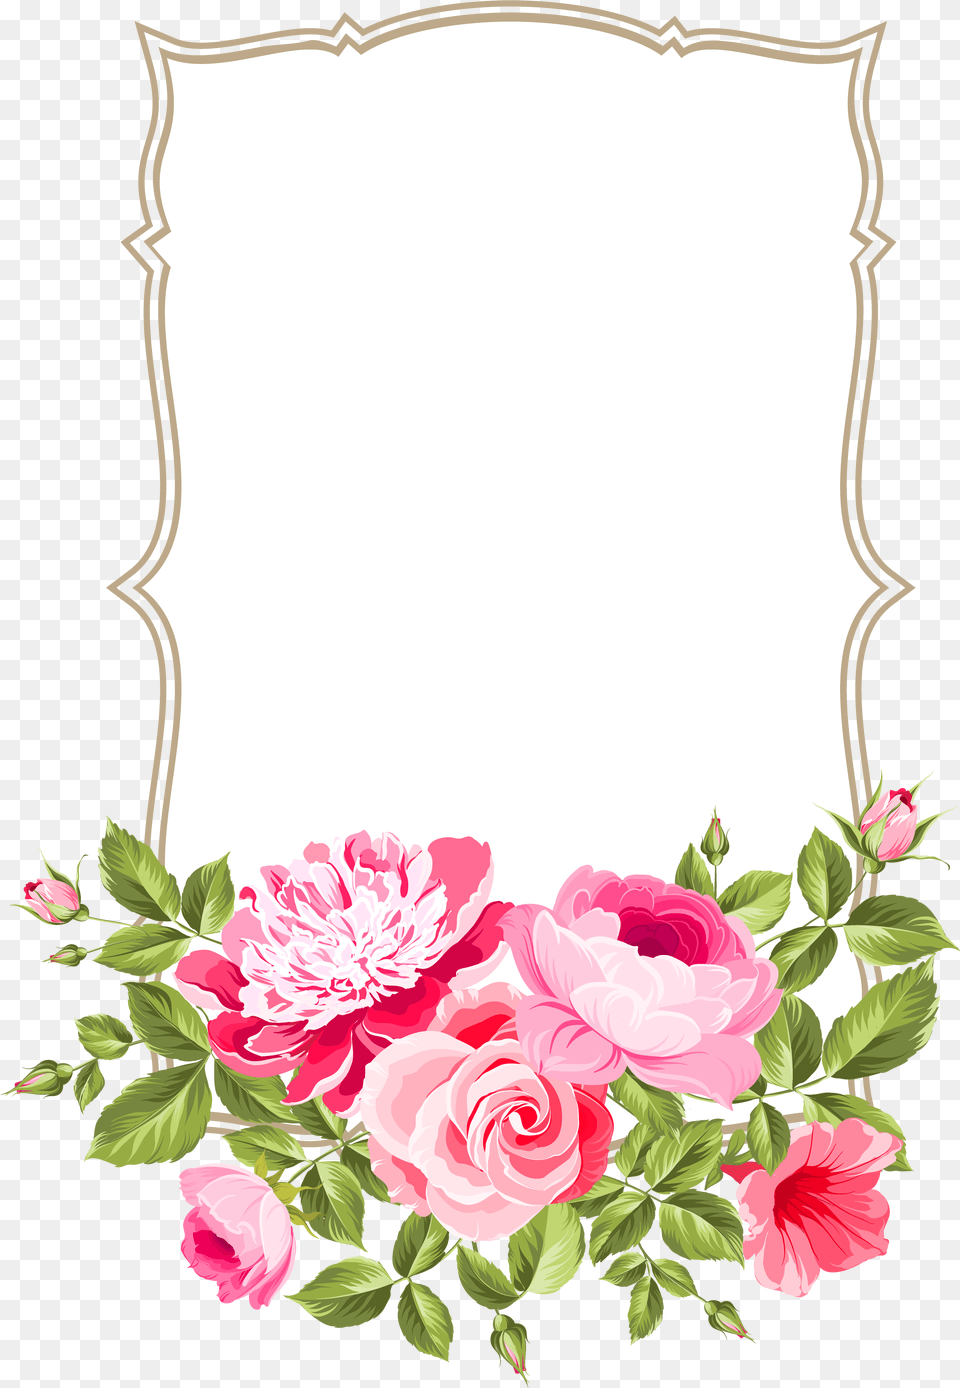 Library Of Royalty Flower Garland Flowers Garland, Graphics, Plant, Floral Design, Rose Free Png Download